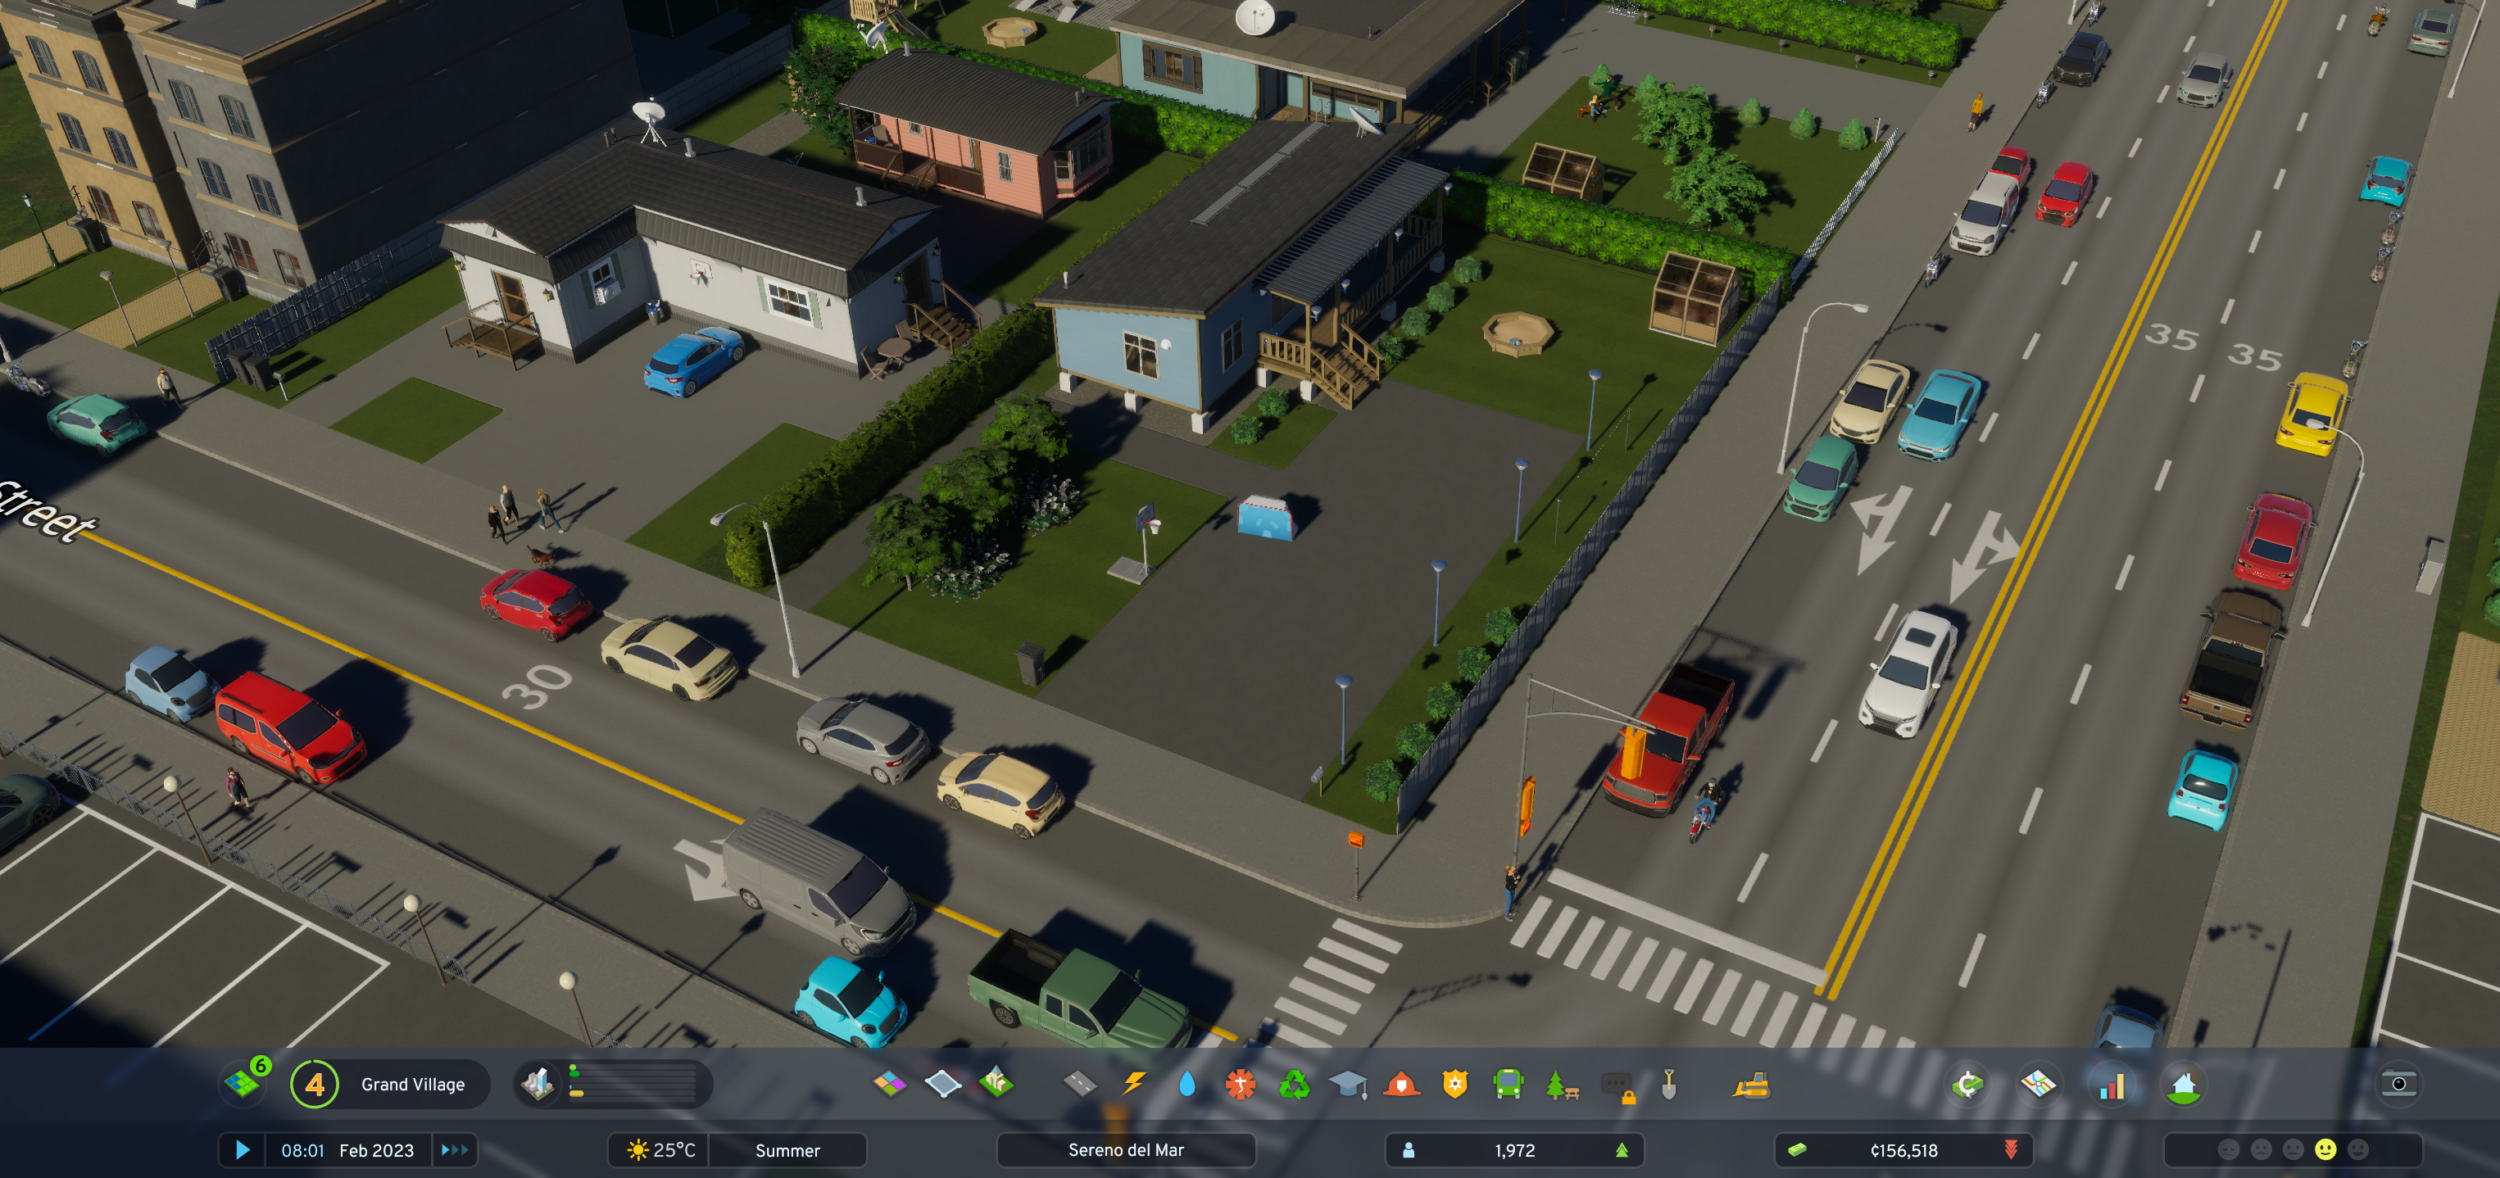 Cities: Skylines 2 Review